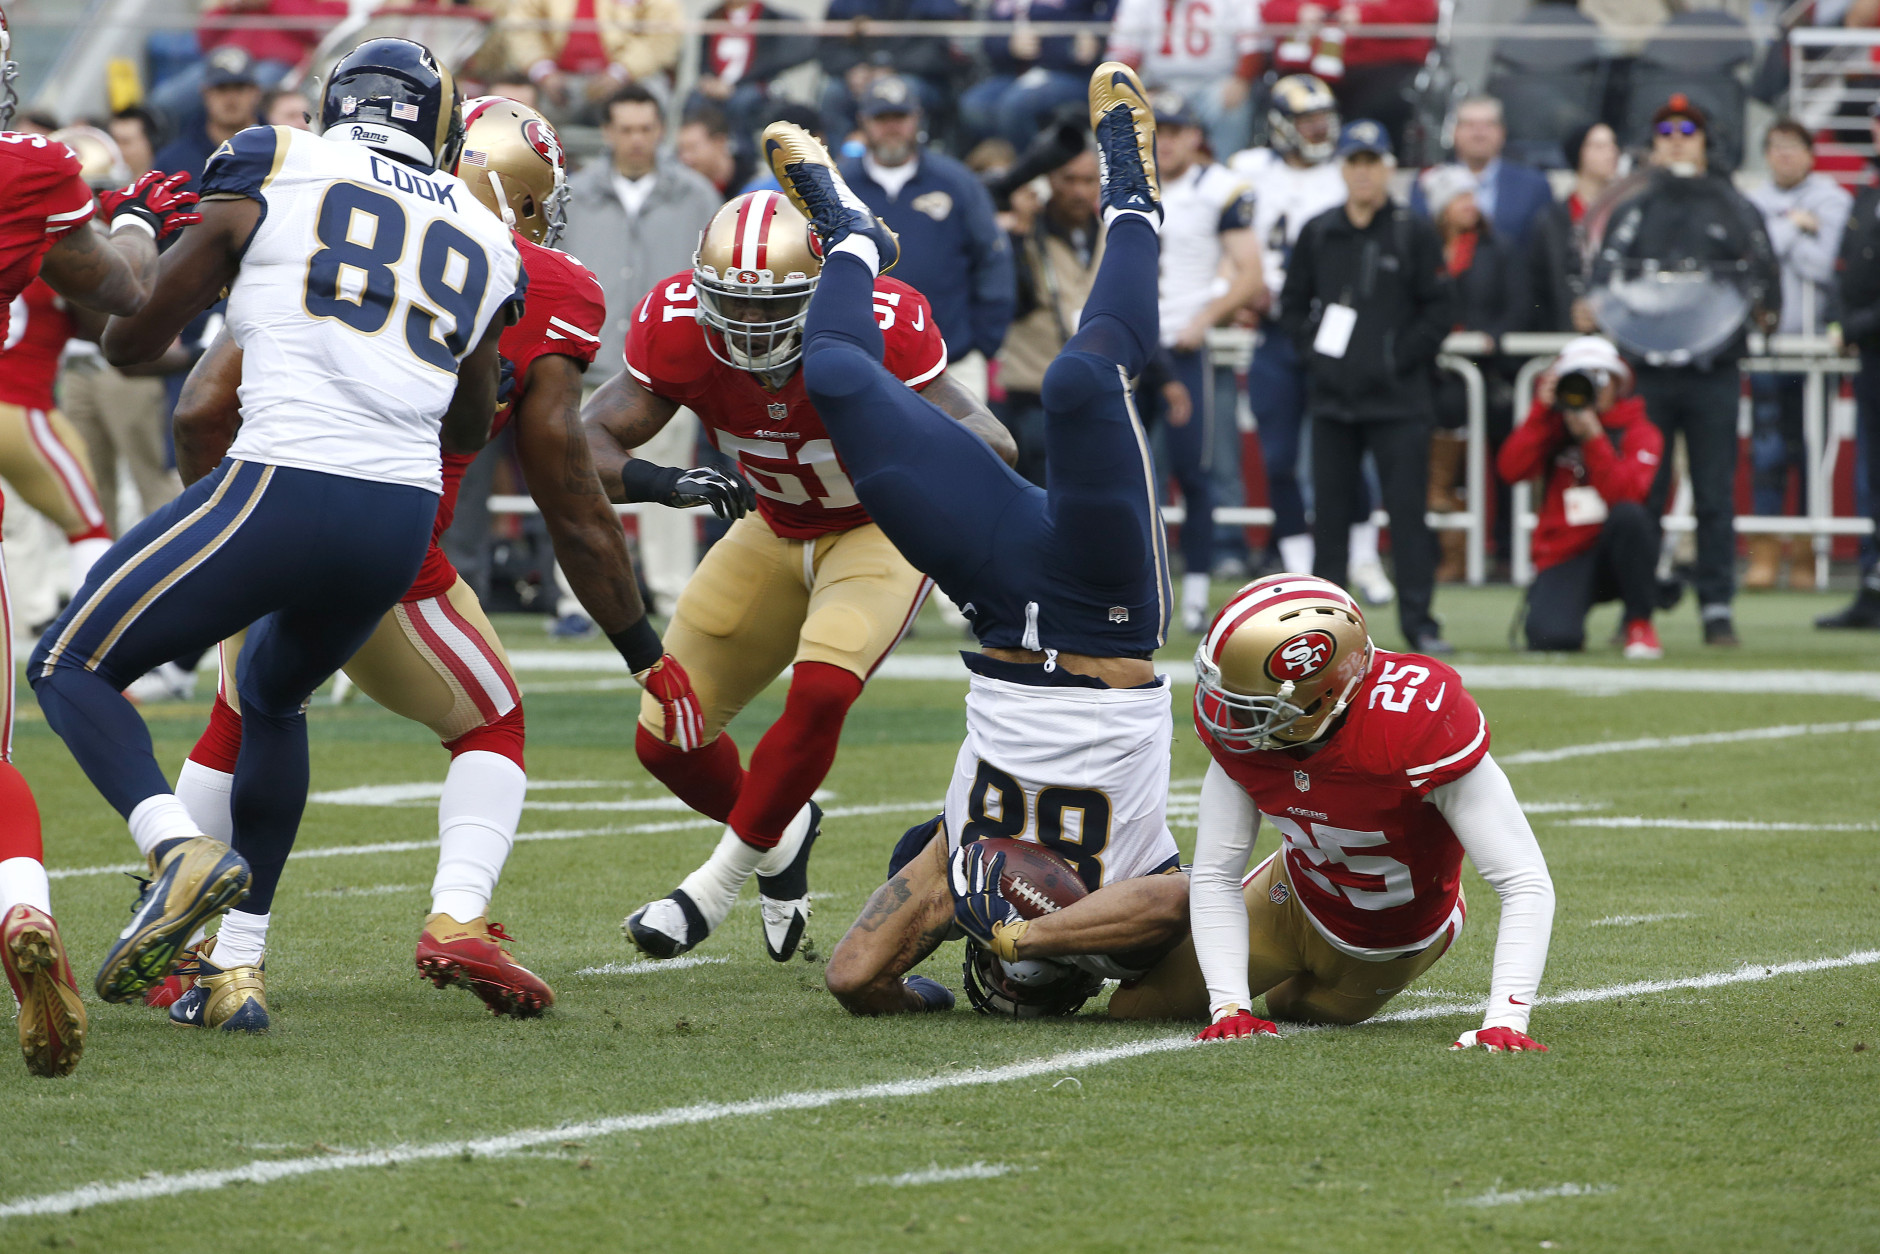 St. Louis Rams tight end Lance Kendricks (88) is tackled by San Francisco 49ers strong safety Jimmie Ward (25) during the first half of an NFL football game in Santa Clara, Calif., Sunday, Jan. 3, 2016. (AP Photo/Tony Avelar)